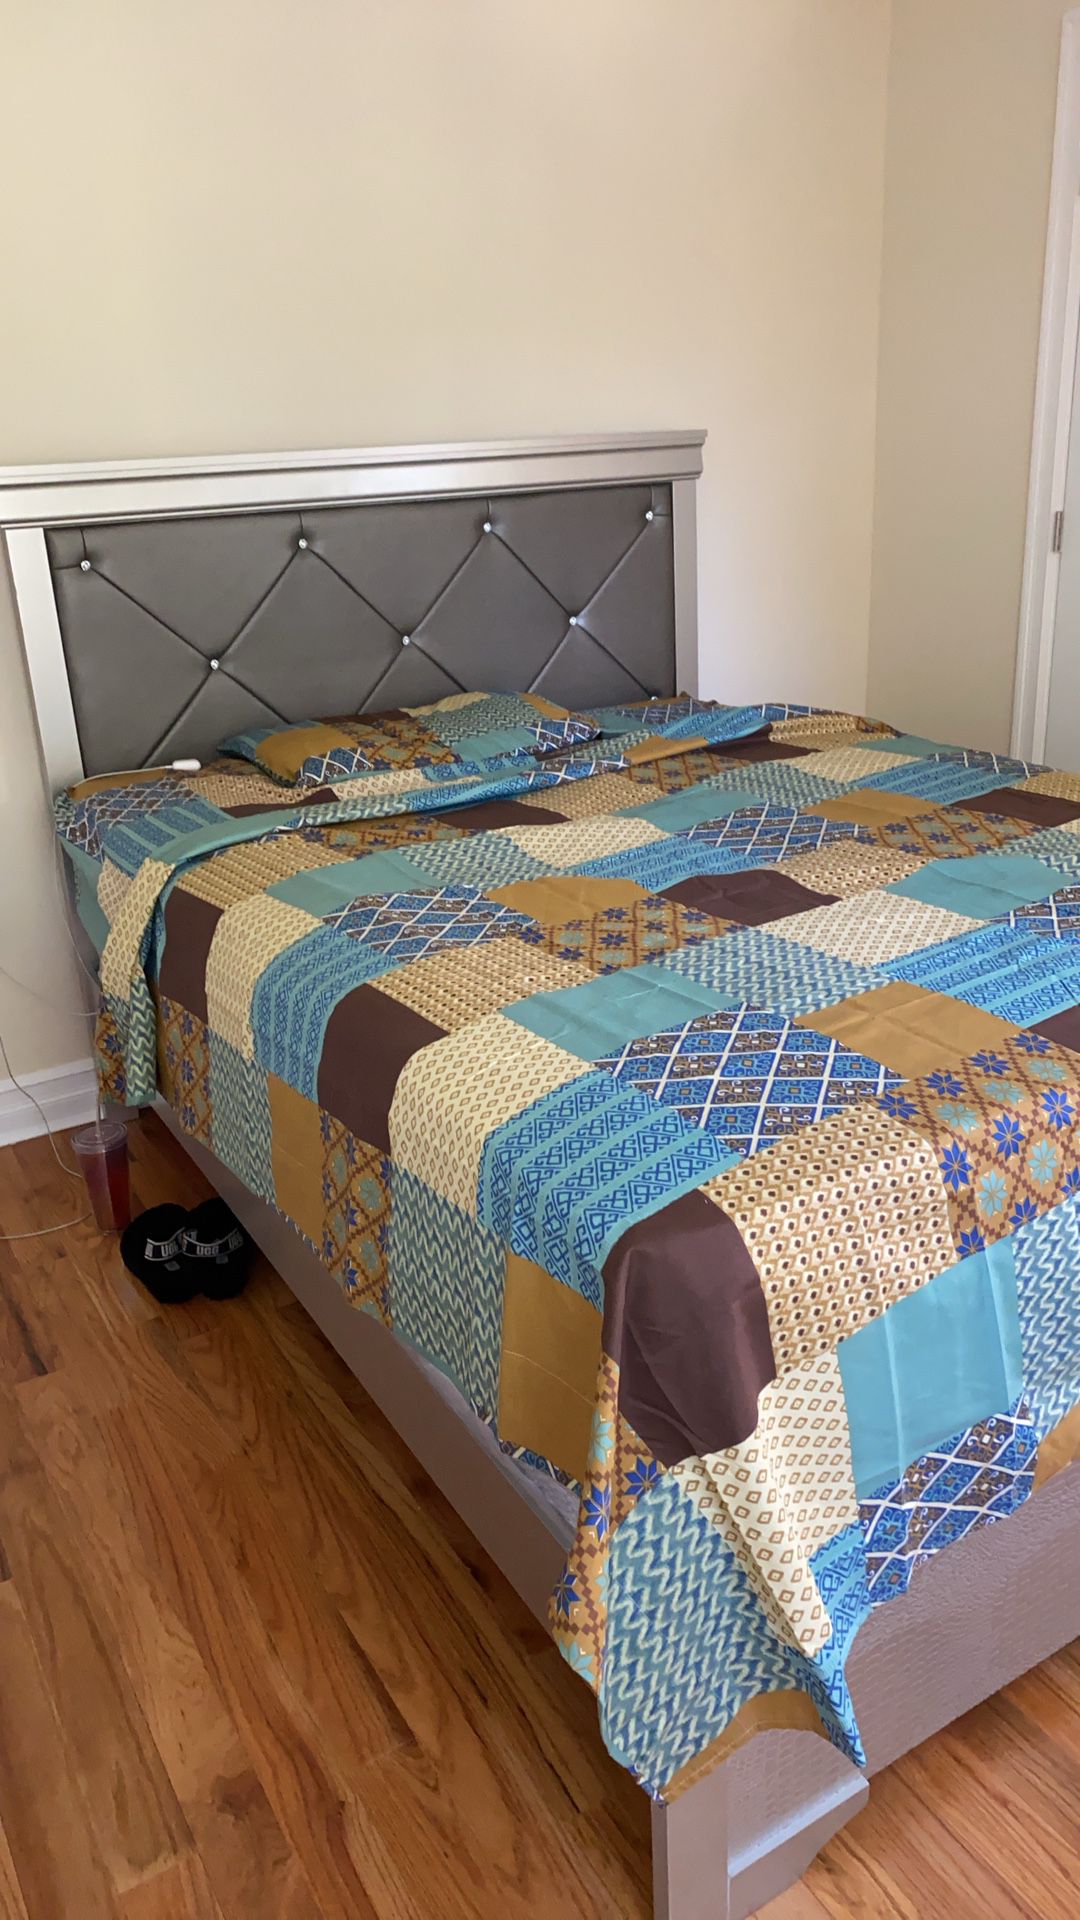 Queen size mattress and box spring for sale! The bed frame is not for sale